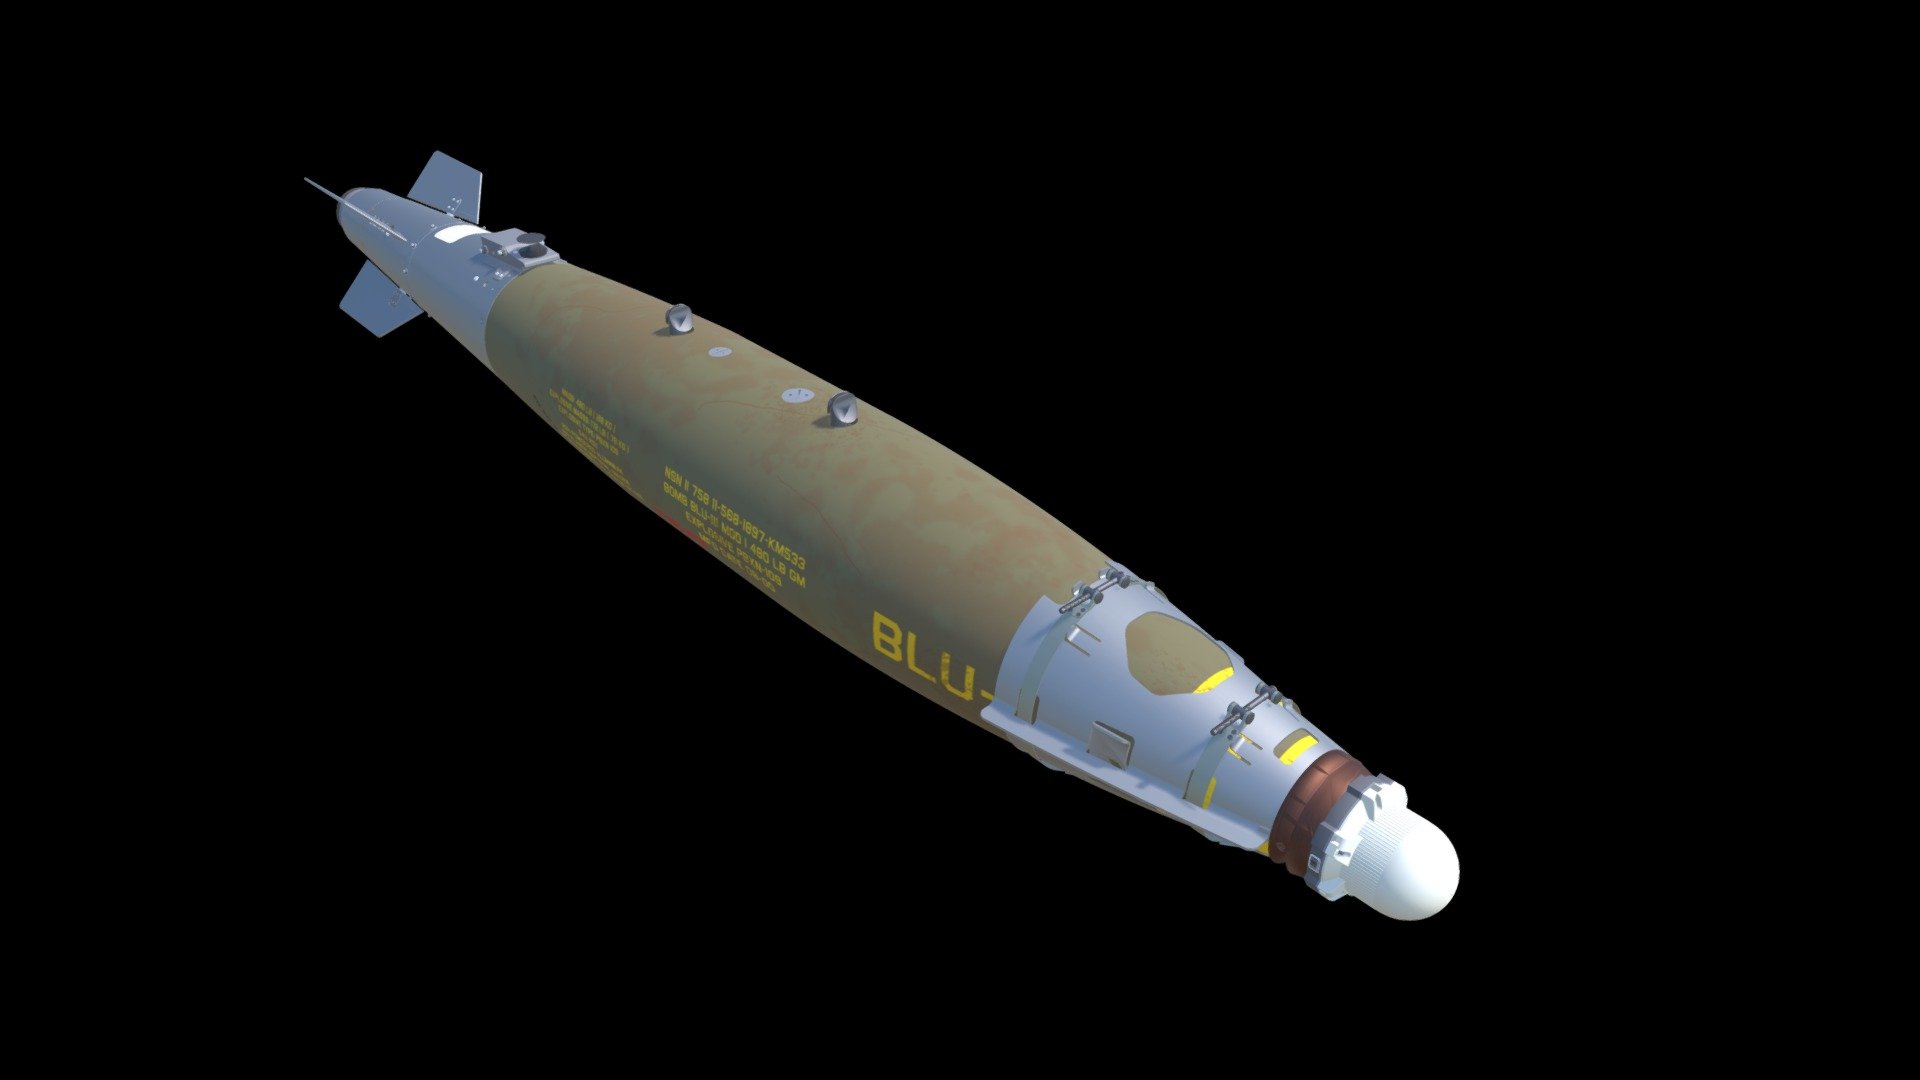 The designation GBU-38(V)/B was allocated to 500 lb class JDAM bombs with guidance kits from Boeing. At least two different types of warhead can be used with the 500 lb JDAM tailkits
•   MK 82: Standard 500 lb LDGP (Low-Drag General Purpose) bomb
•   BLU-111/B: Instead of the MK 82, the BLU-111/B warhead can also be used in the GBU-38/B series JDAMs. The BLU-111/B is externally identical to the MK 82, but uses the PBXN-109 thermally insensitive explosive - GBU-38 JDAM Bomb - 3D model by Edgar Brito (@e.brito) 3d model